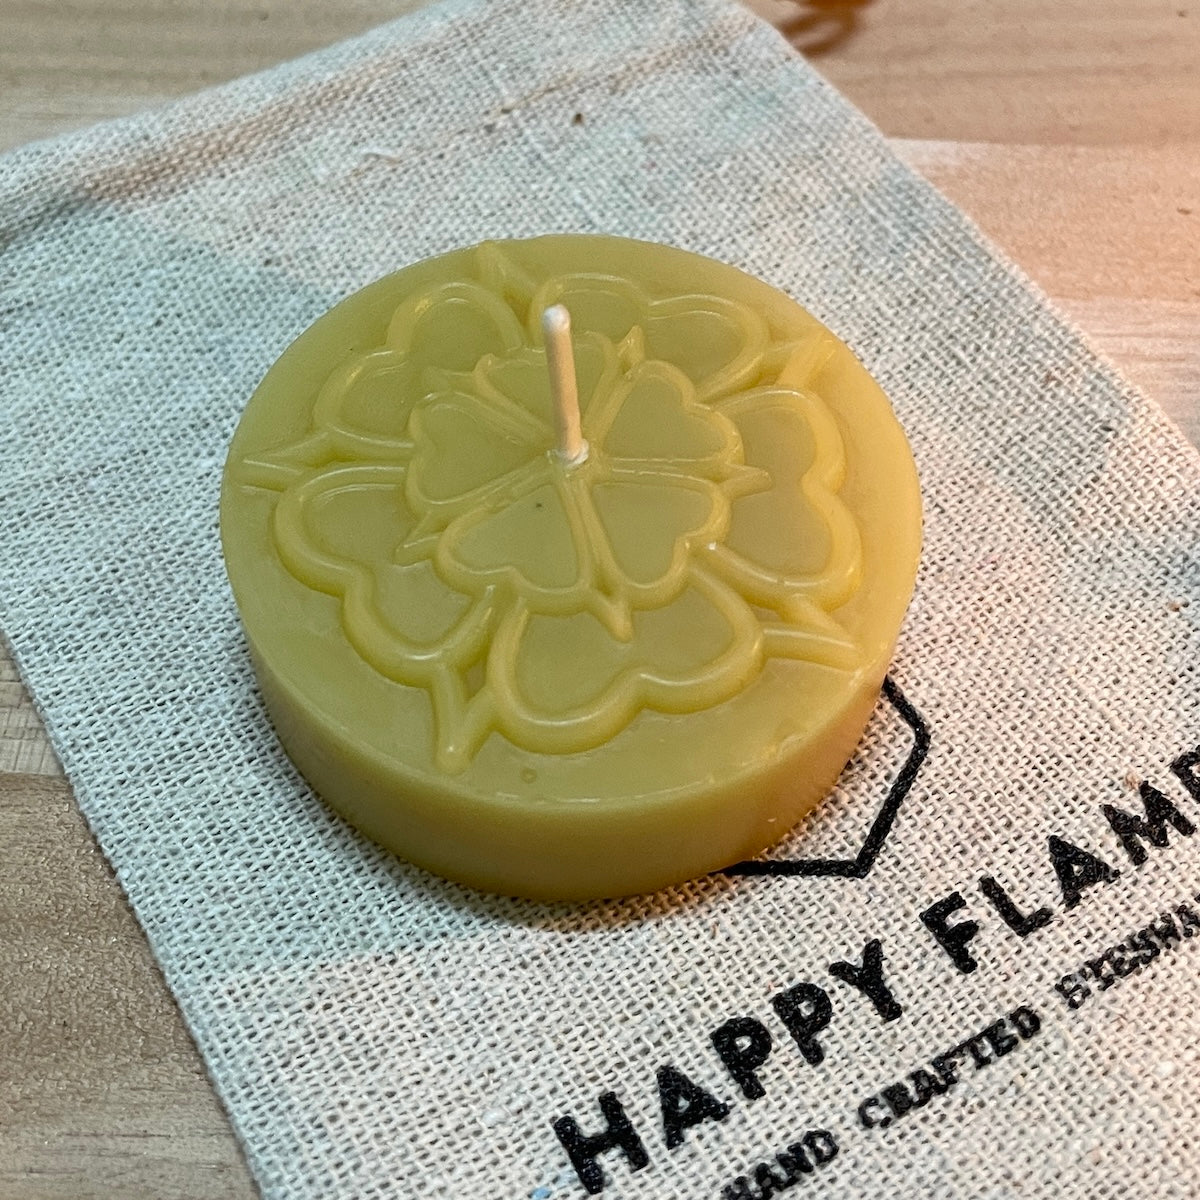 Beeswax mediation candle with heart pattern